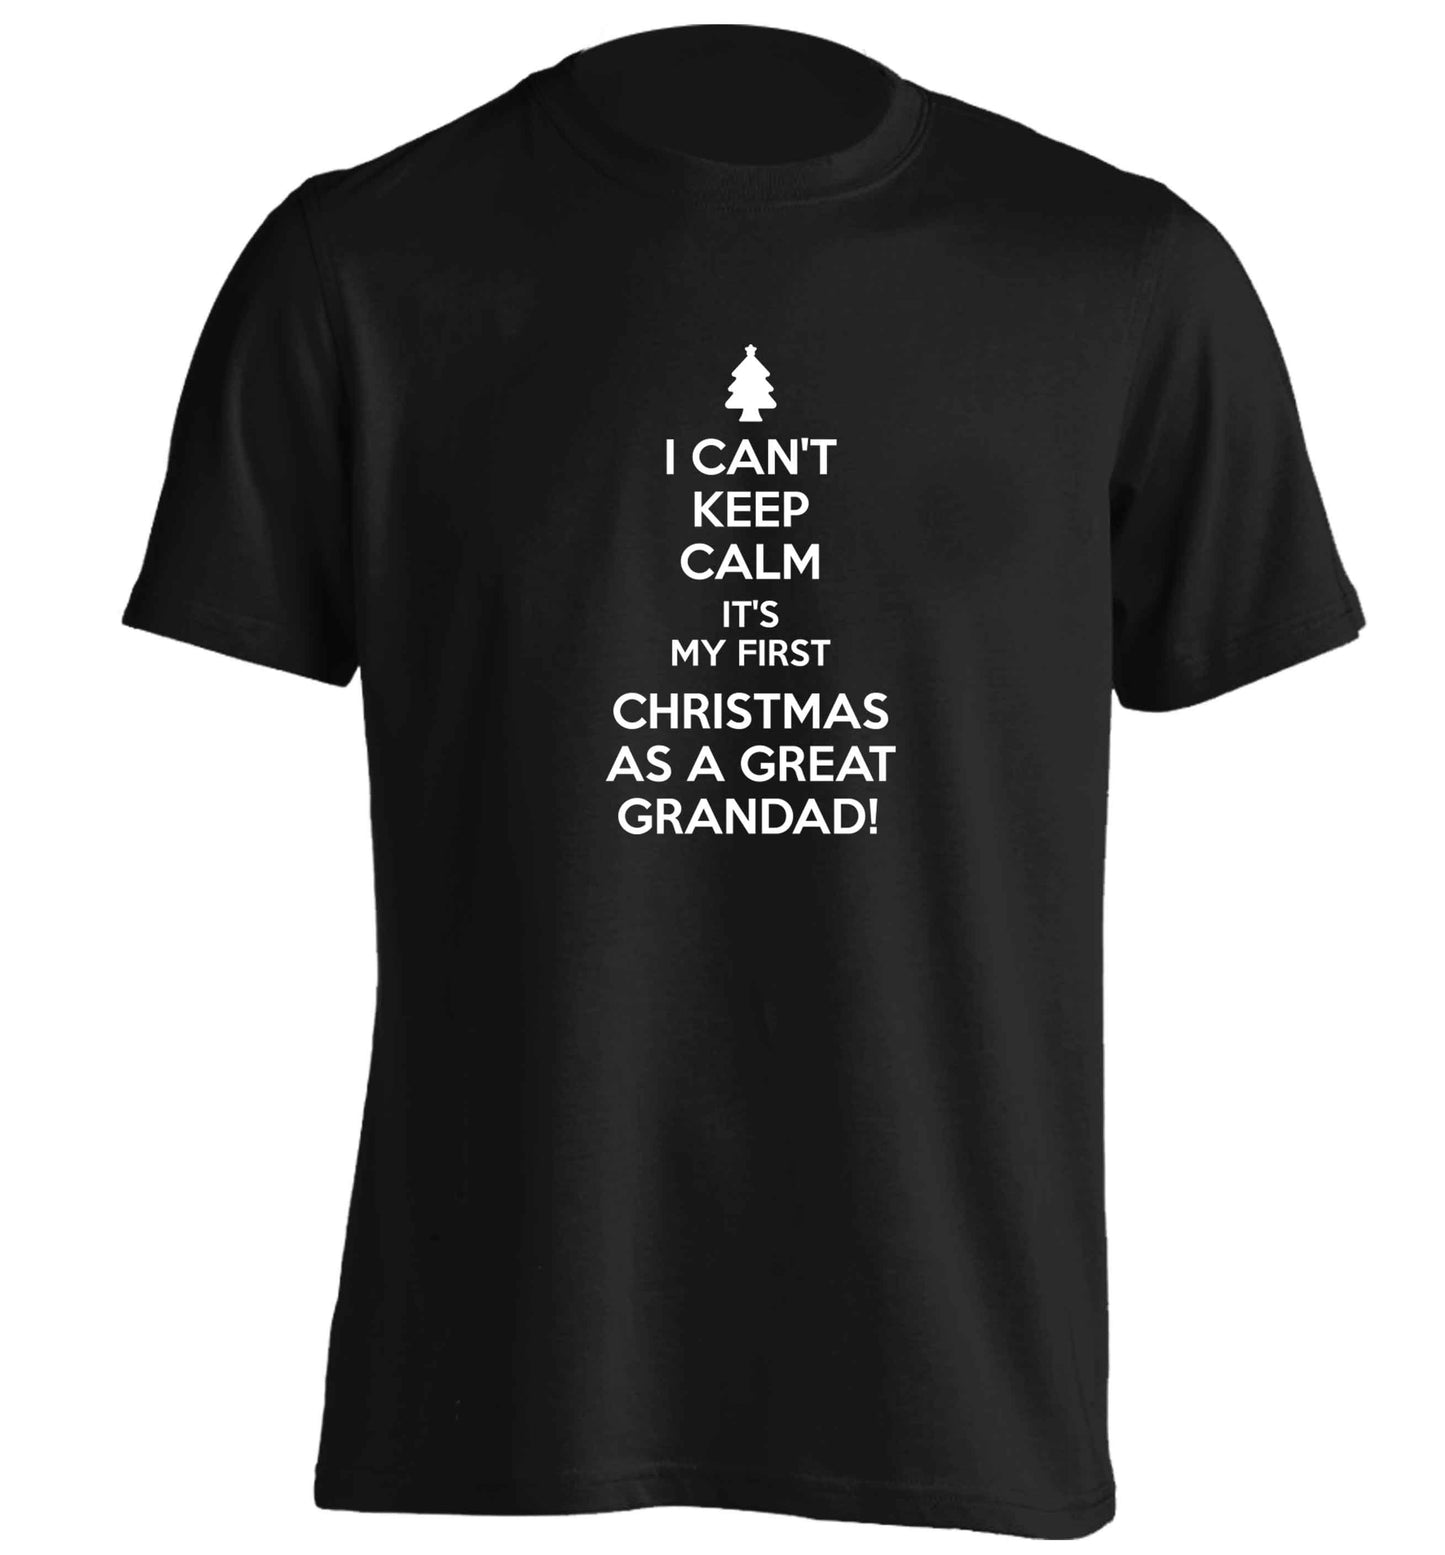 I can't keep calm it's my first Christmas as a great grandad! adults unisex black Tshirt 2XL